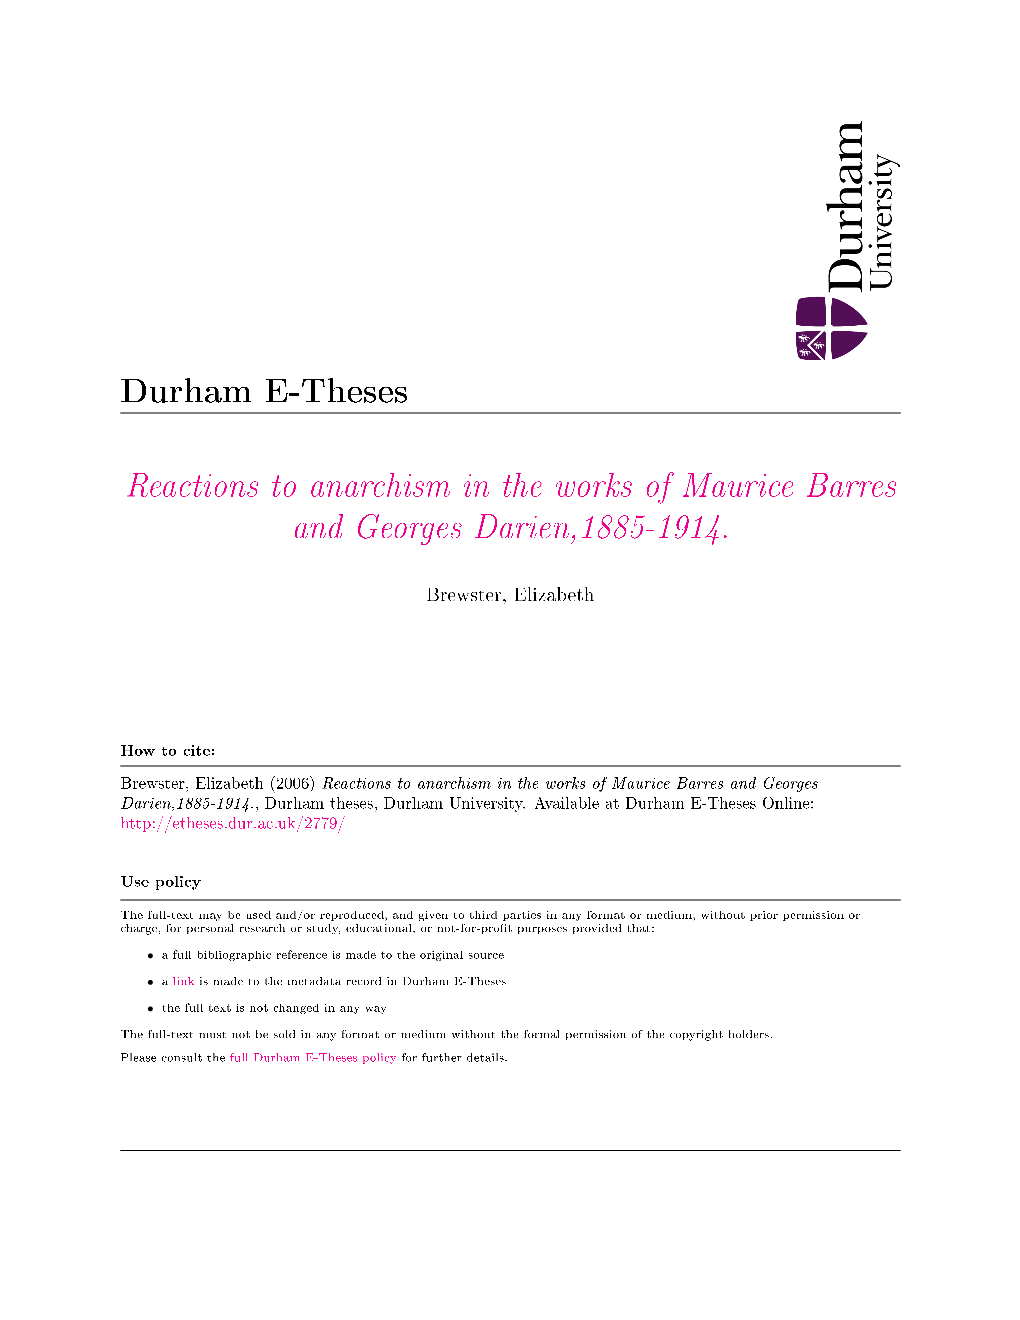 Reactions to Anarchism in the Worlcs of Maurice Barres and Georges Darien, 1885-1914